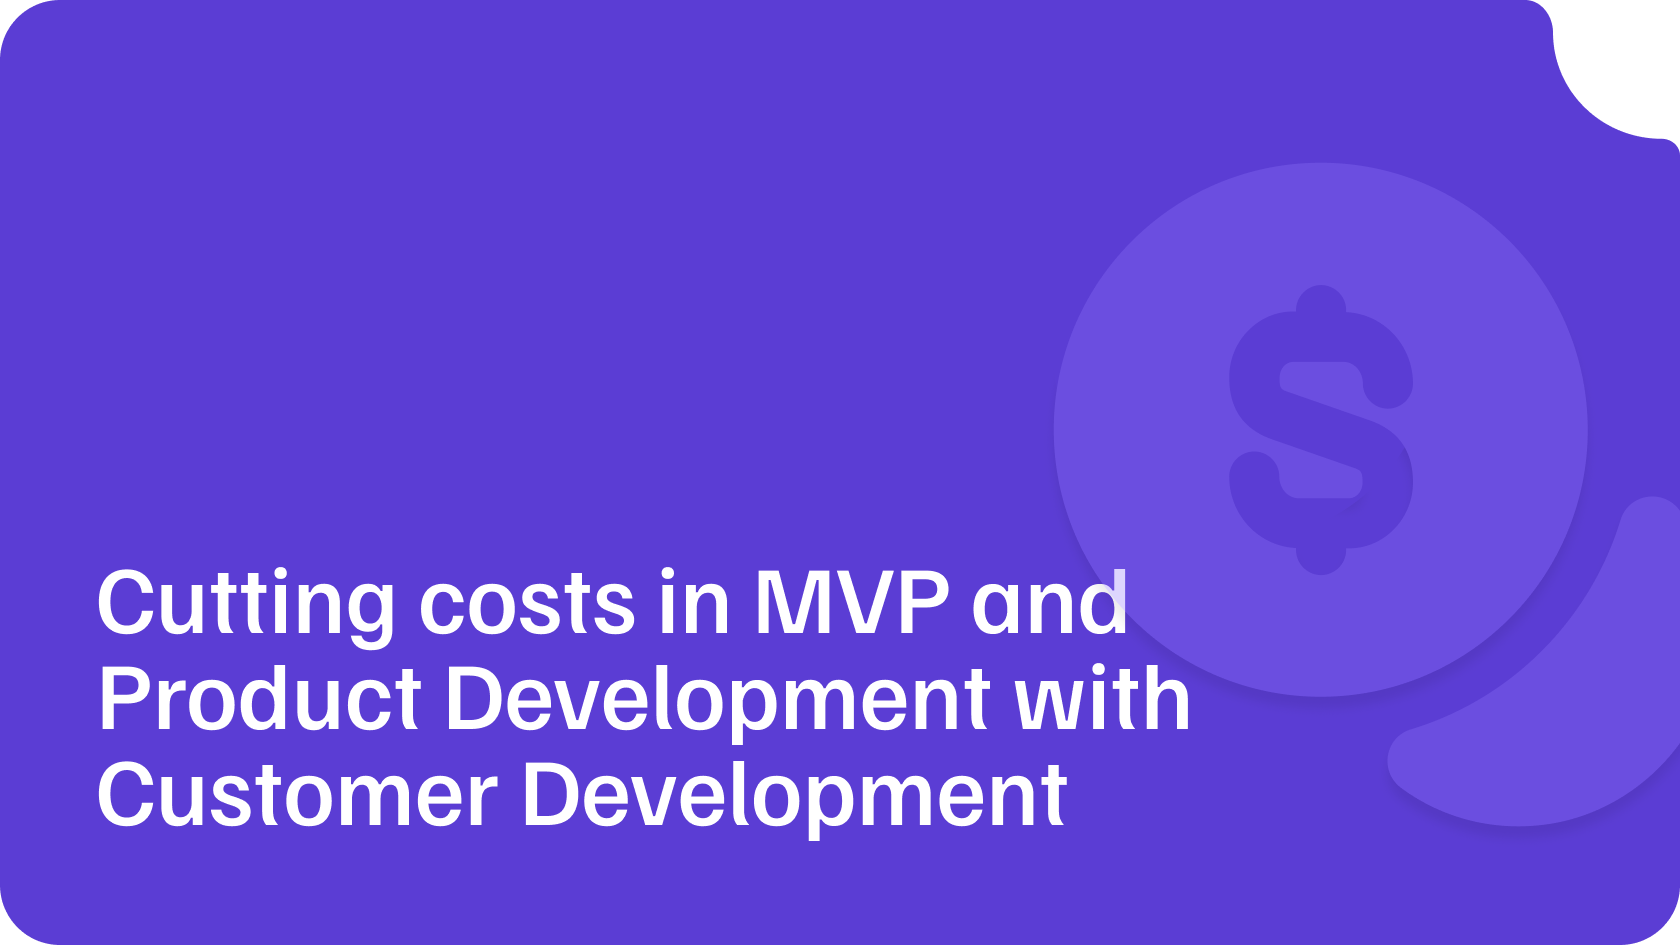 Cutting costs in MVP and Product Development with Customer Development